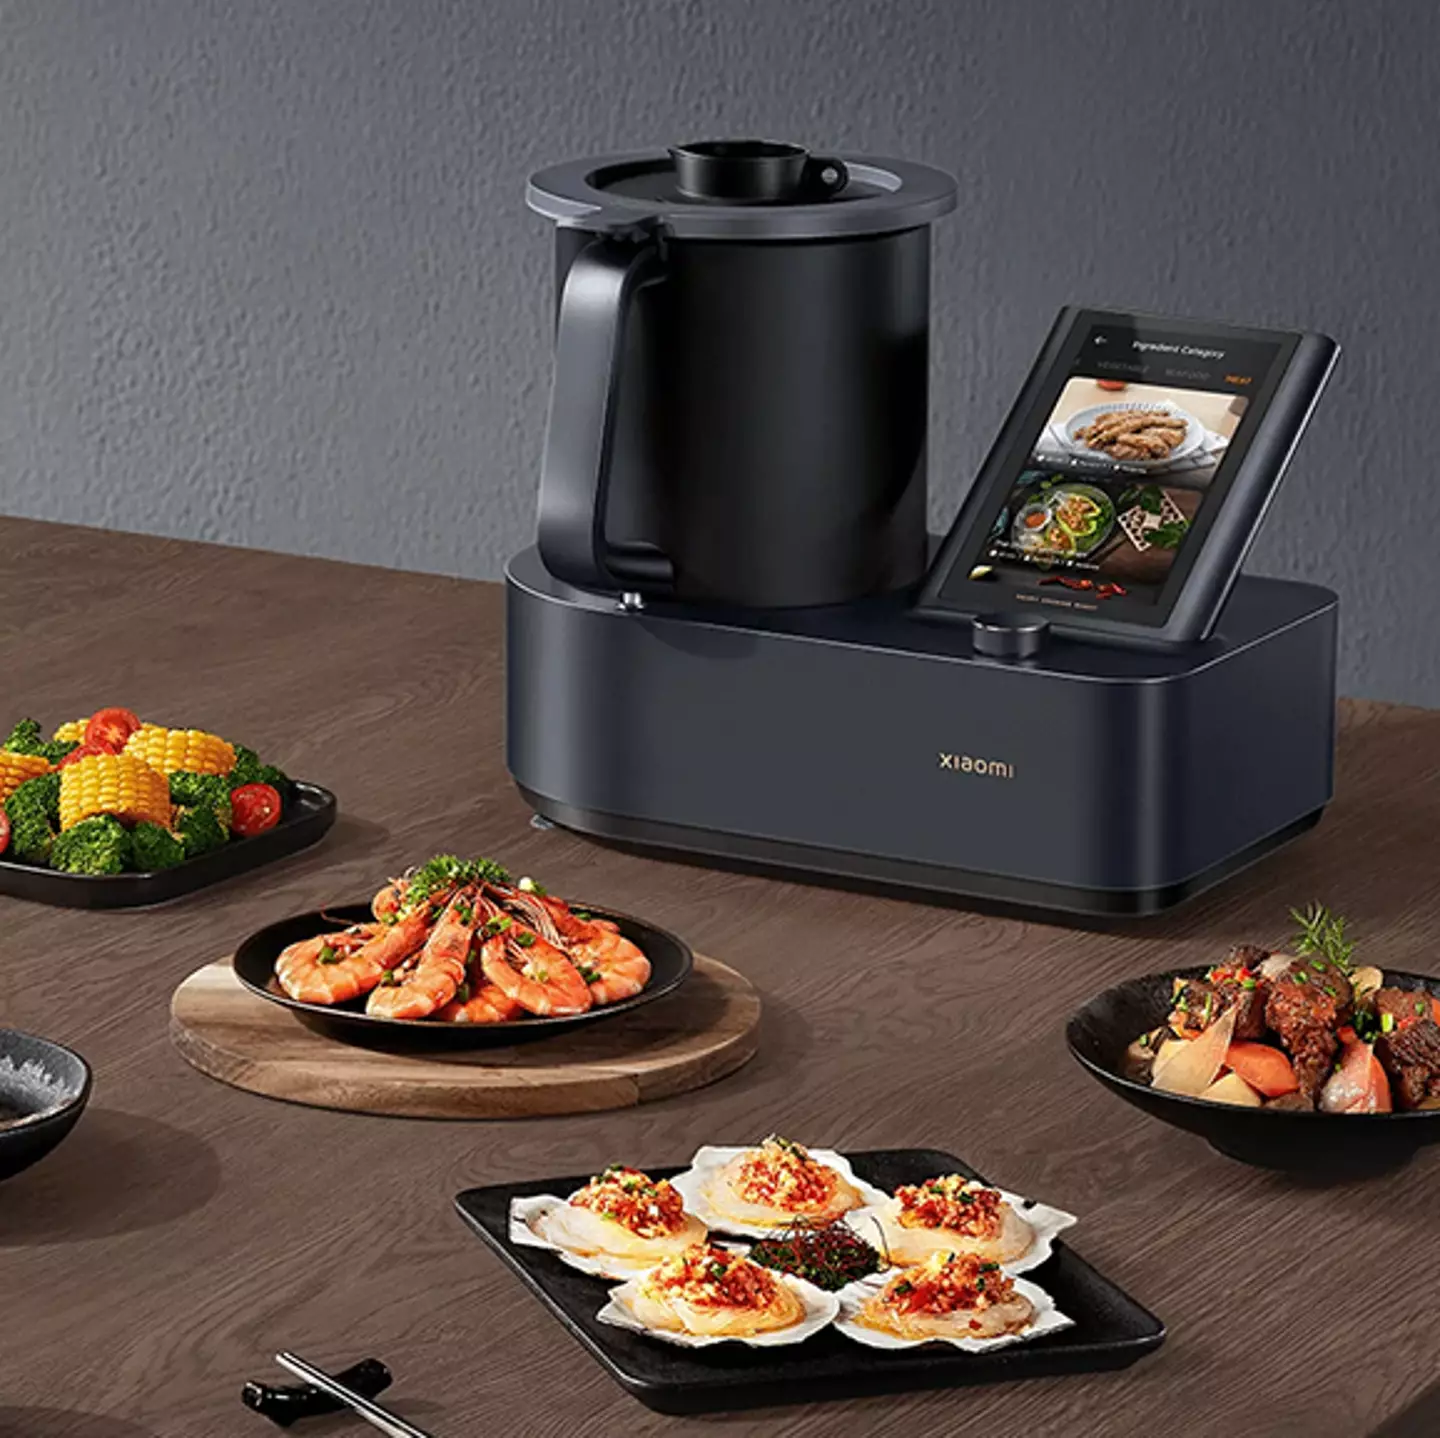 Smart Cooking Robot is the latest kitchen appliance that’ll make you forget about your air fryer